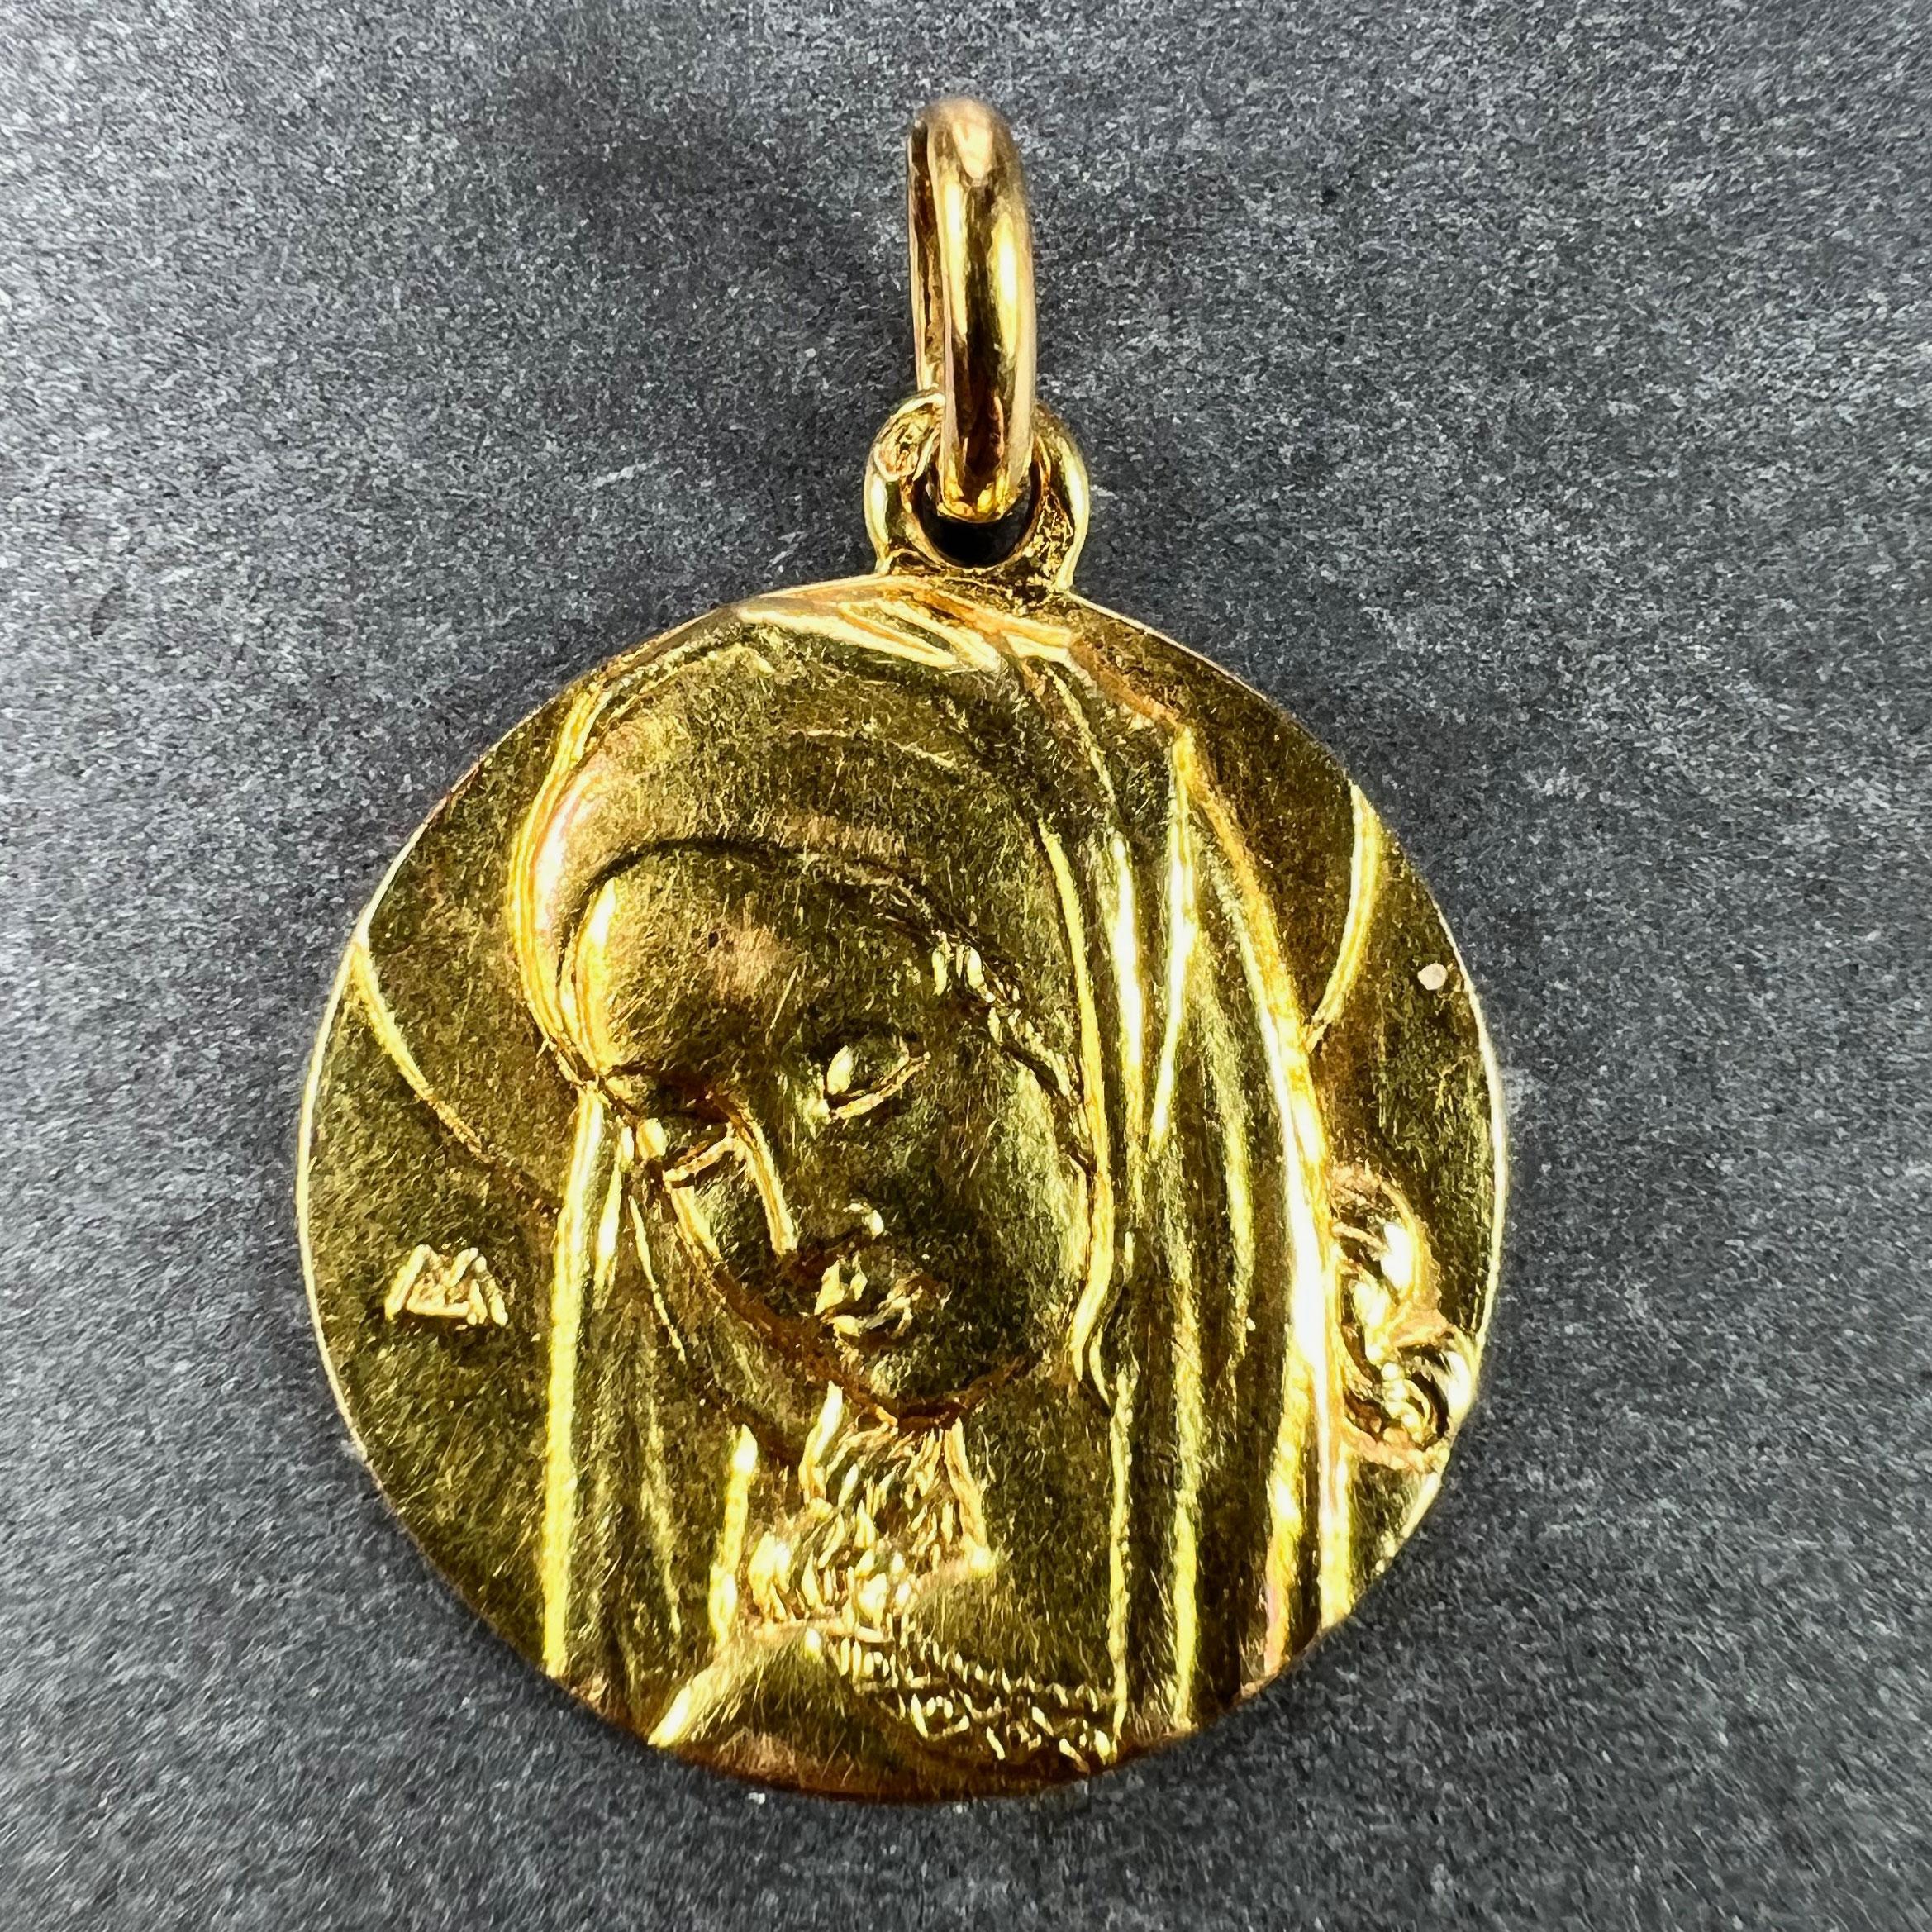 A French 18 karat (18K) yellow gold charm pendant designed as a medal depicting the Virgin Mary. Stamped with the eagle's head mark for 18 karat gold and French manufacture and an unknown maker's mark.

Dimensions: 2.1 x 1.8 x 0.15 cm (not including